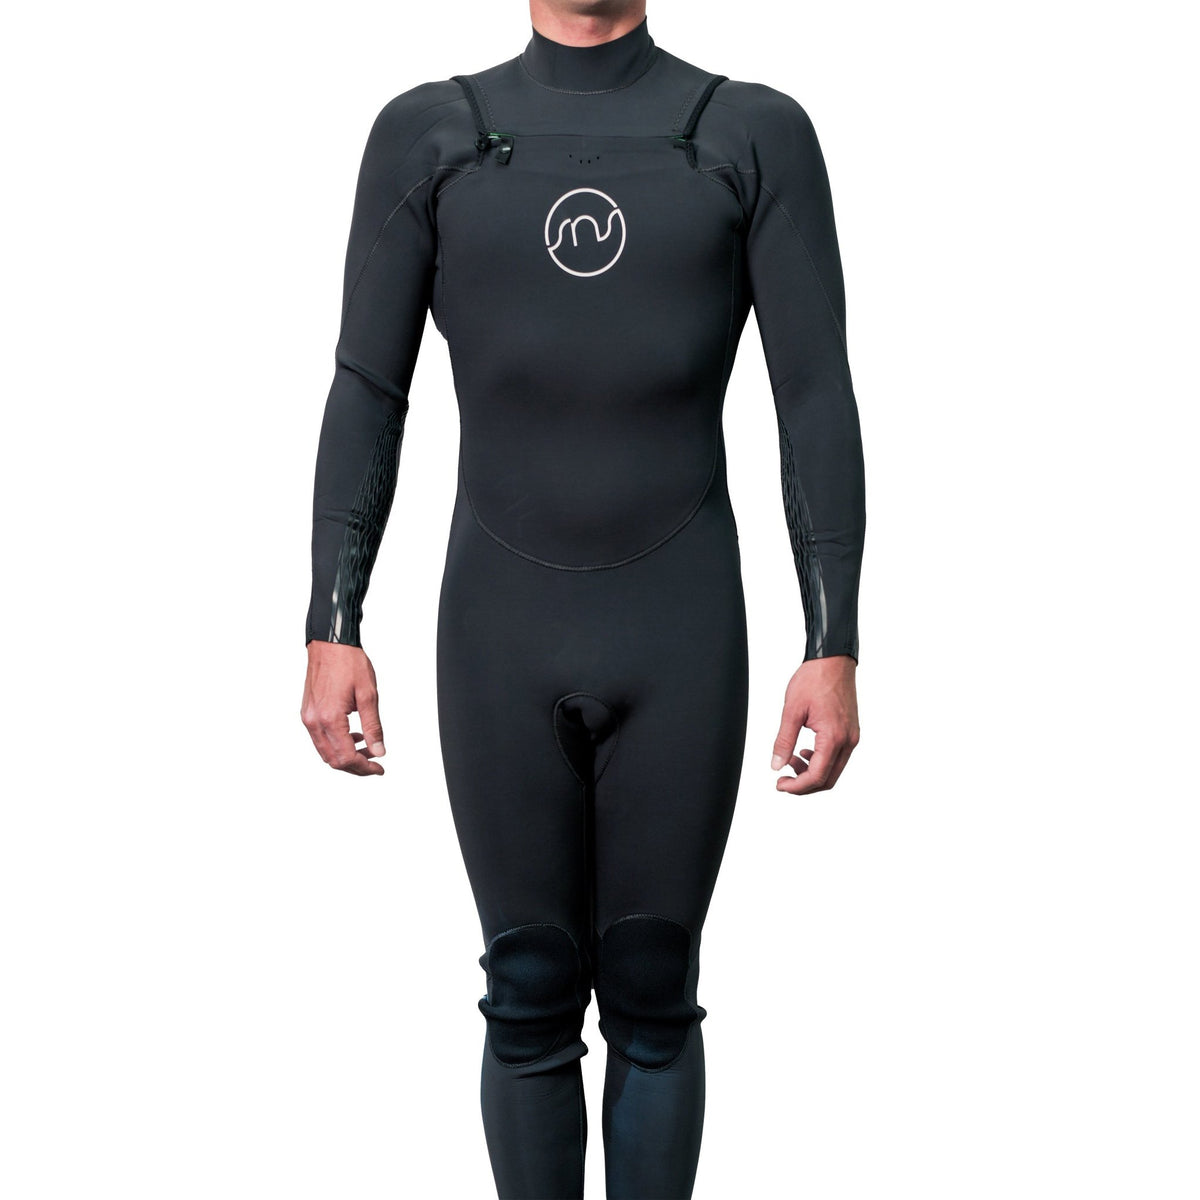 How does Yulex compare with neoprene wetsuits?